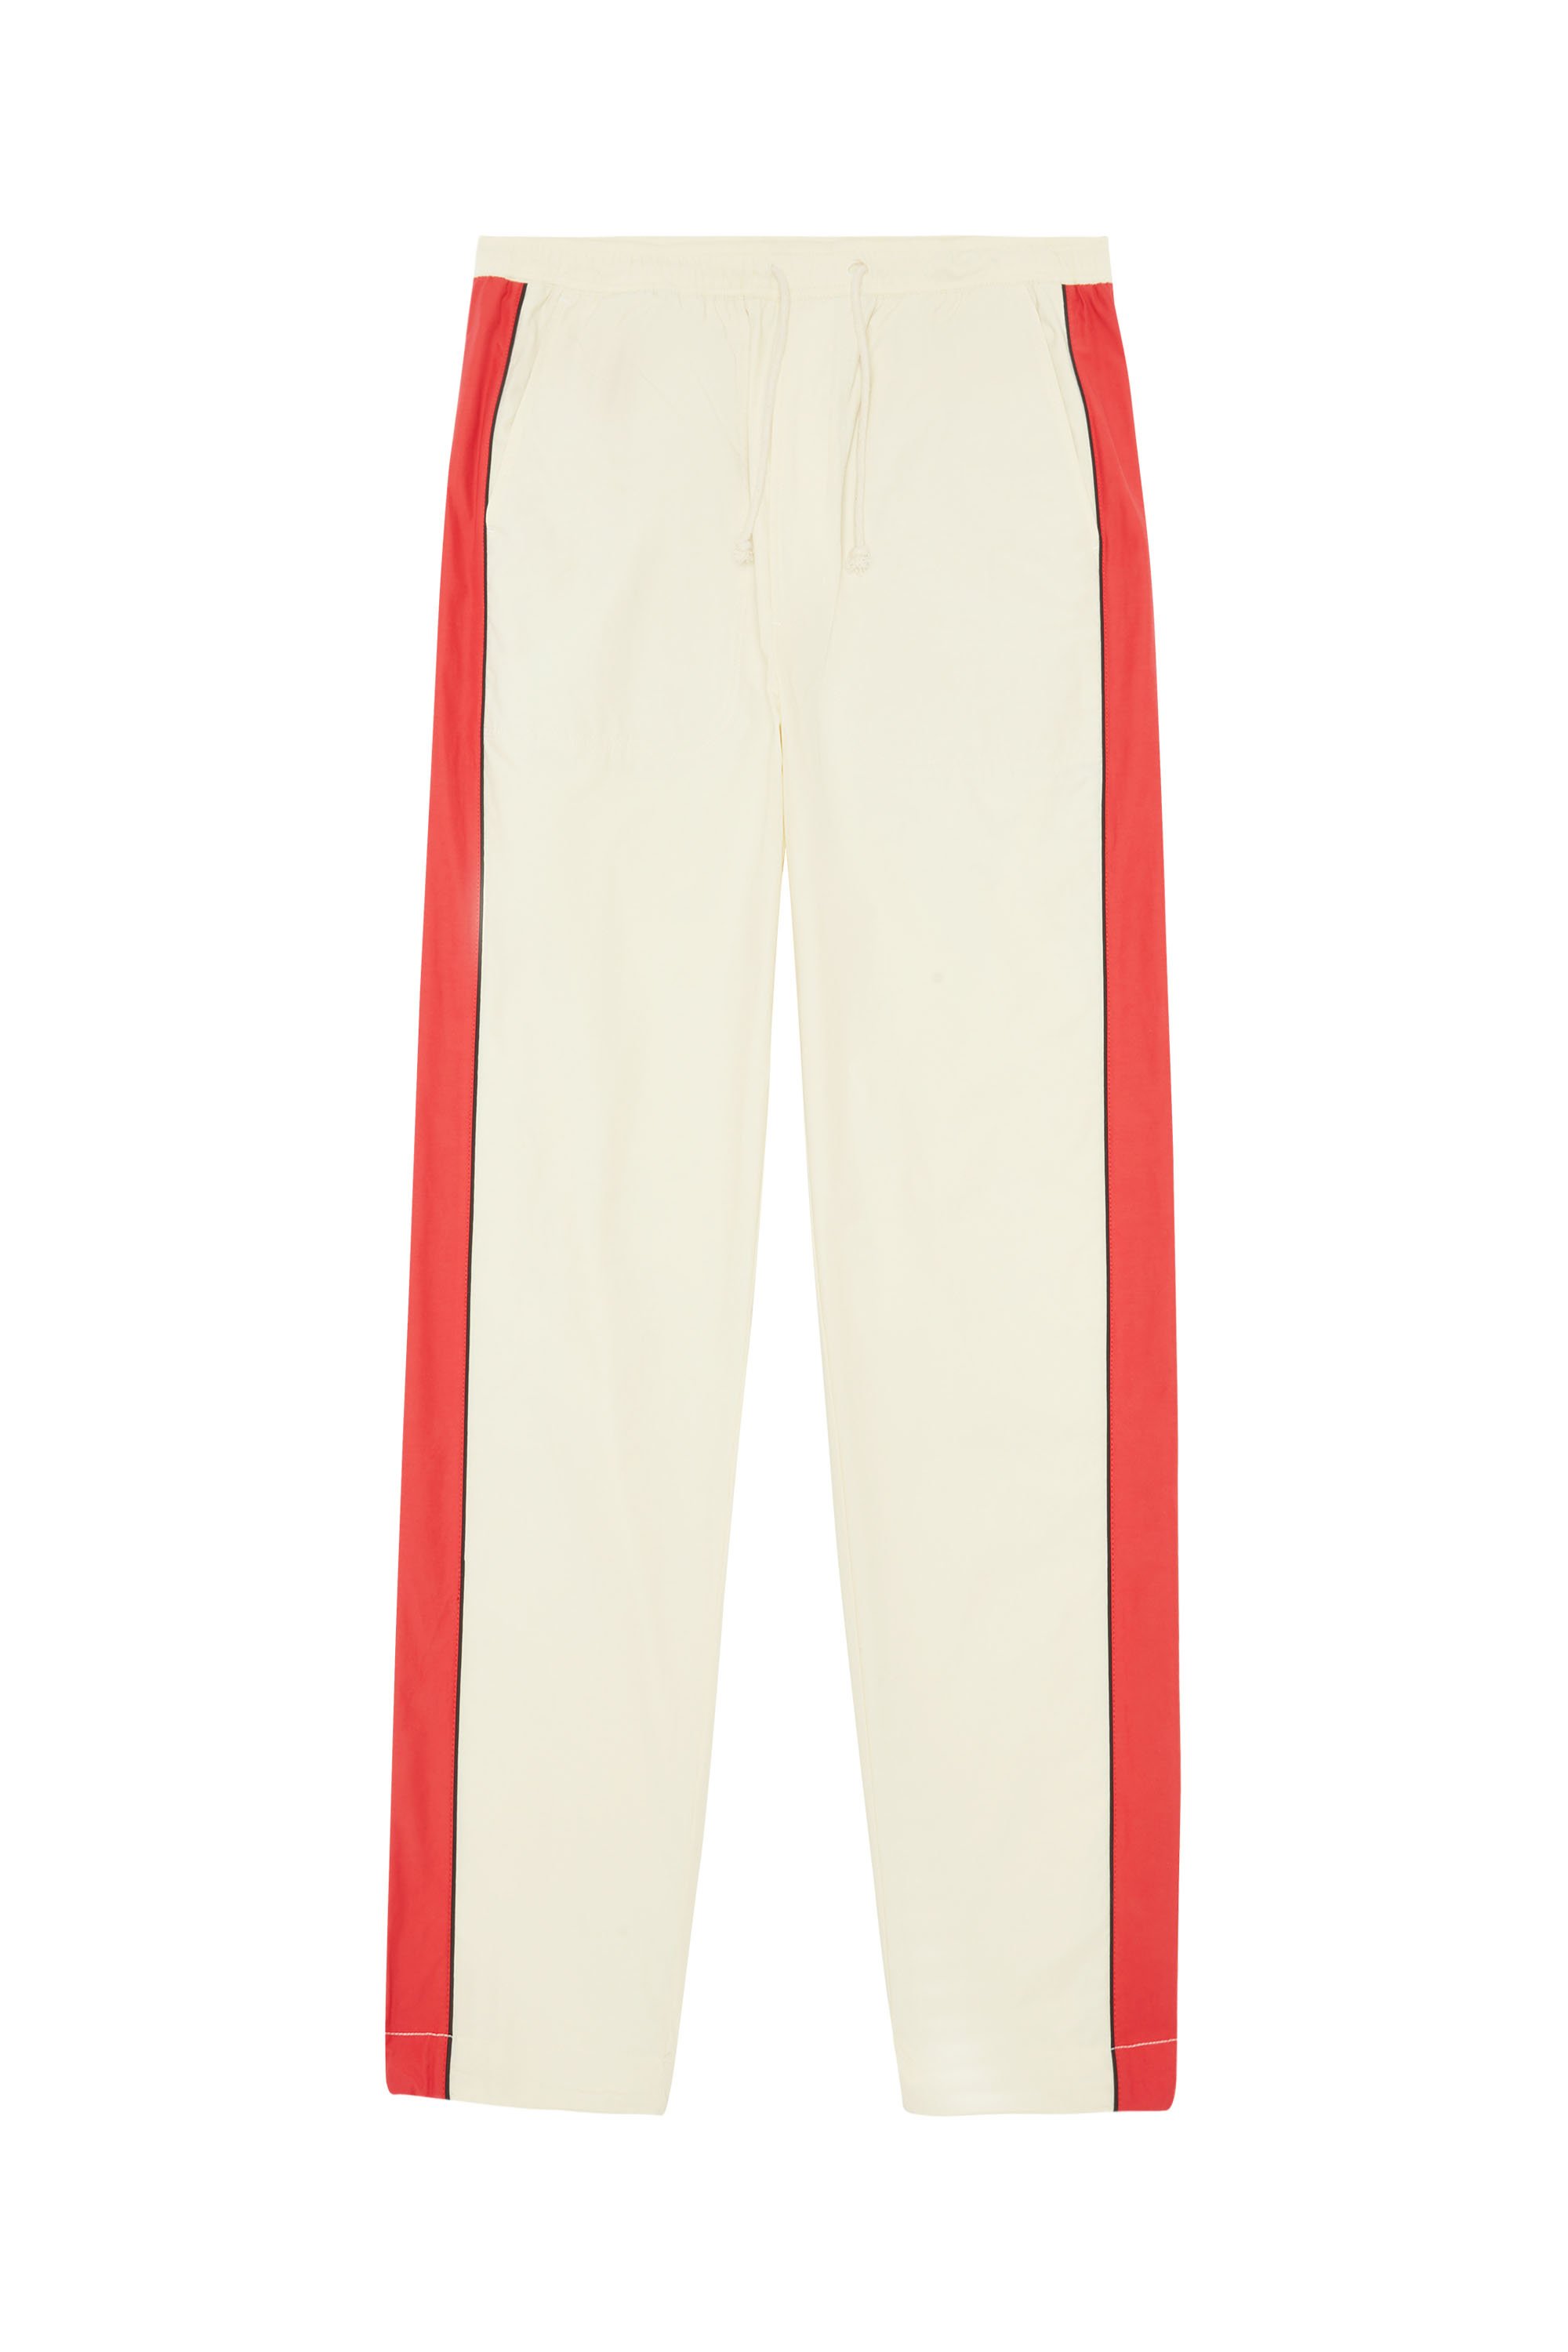 P-SPORTS, Red/White - Pants